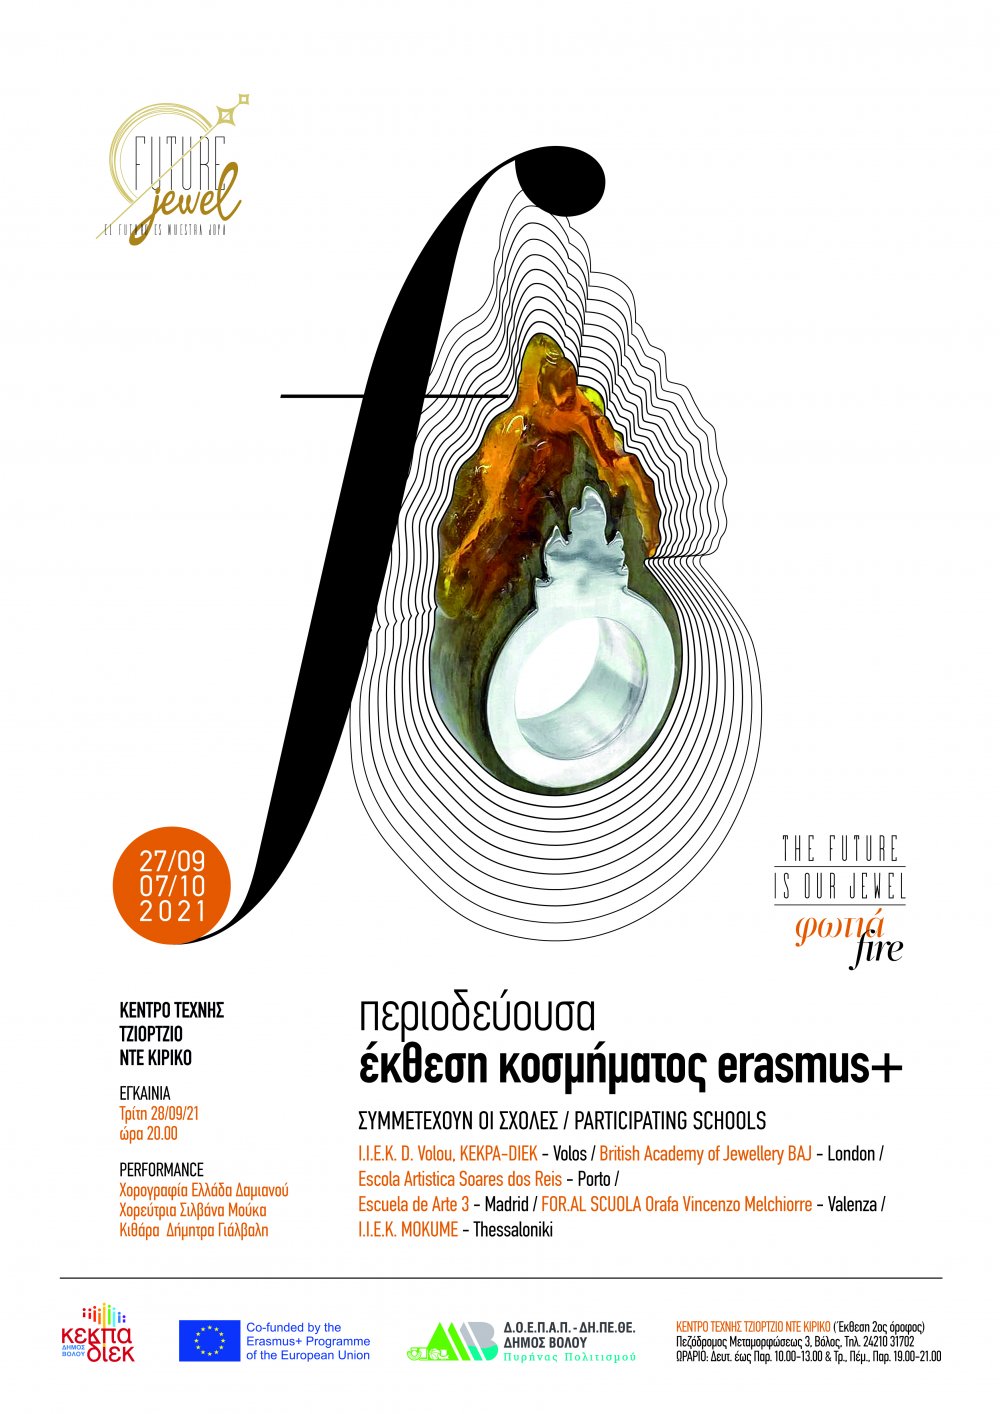 JEWELERY EXHIBITION UNDER THE ERASMUS + PROJECT `` THE FUTURE IS OUR JEWEL `` BY VTI OF KEKPA-DIEK OF VOLOS MUNICIPALITY, FROM 27/9 TO 7/10 AT Giorgio de Chirico ART CENTER.